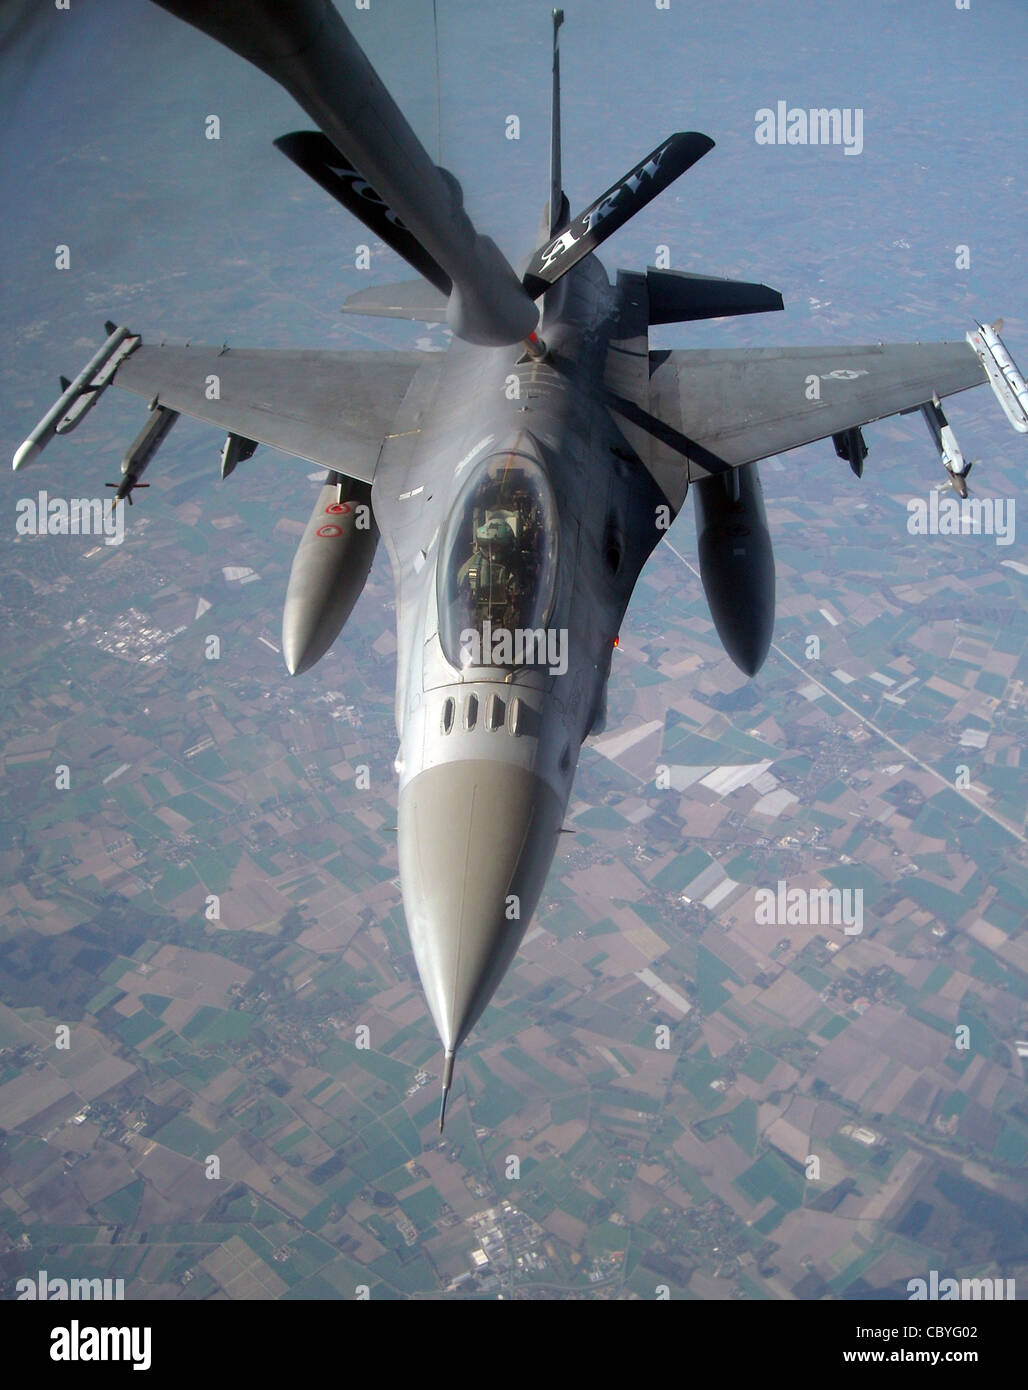 Prior to flying operations being grounded, an F-16 Fighting Falcon from Spangdhalem Air Base, Germany, refuels off a 100th Air Refueling Wing KC-135 Stratotanker during exercise Brilliant Ardent April 15, 2010, at Royal Air Force Mildenhall, England. Stock Photo